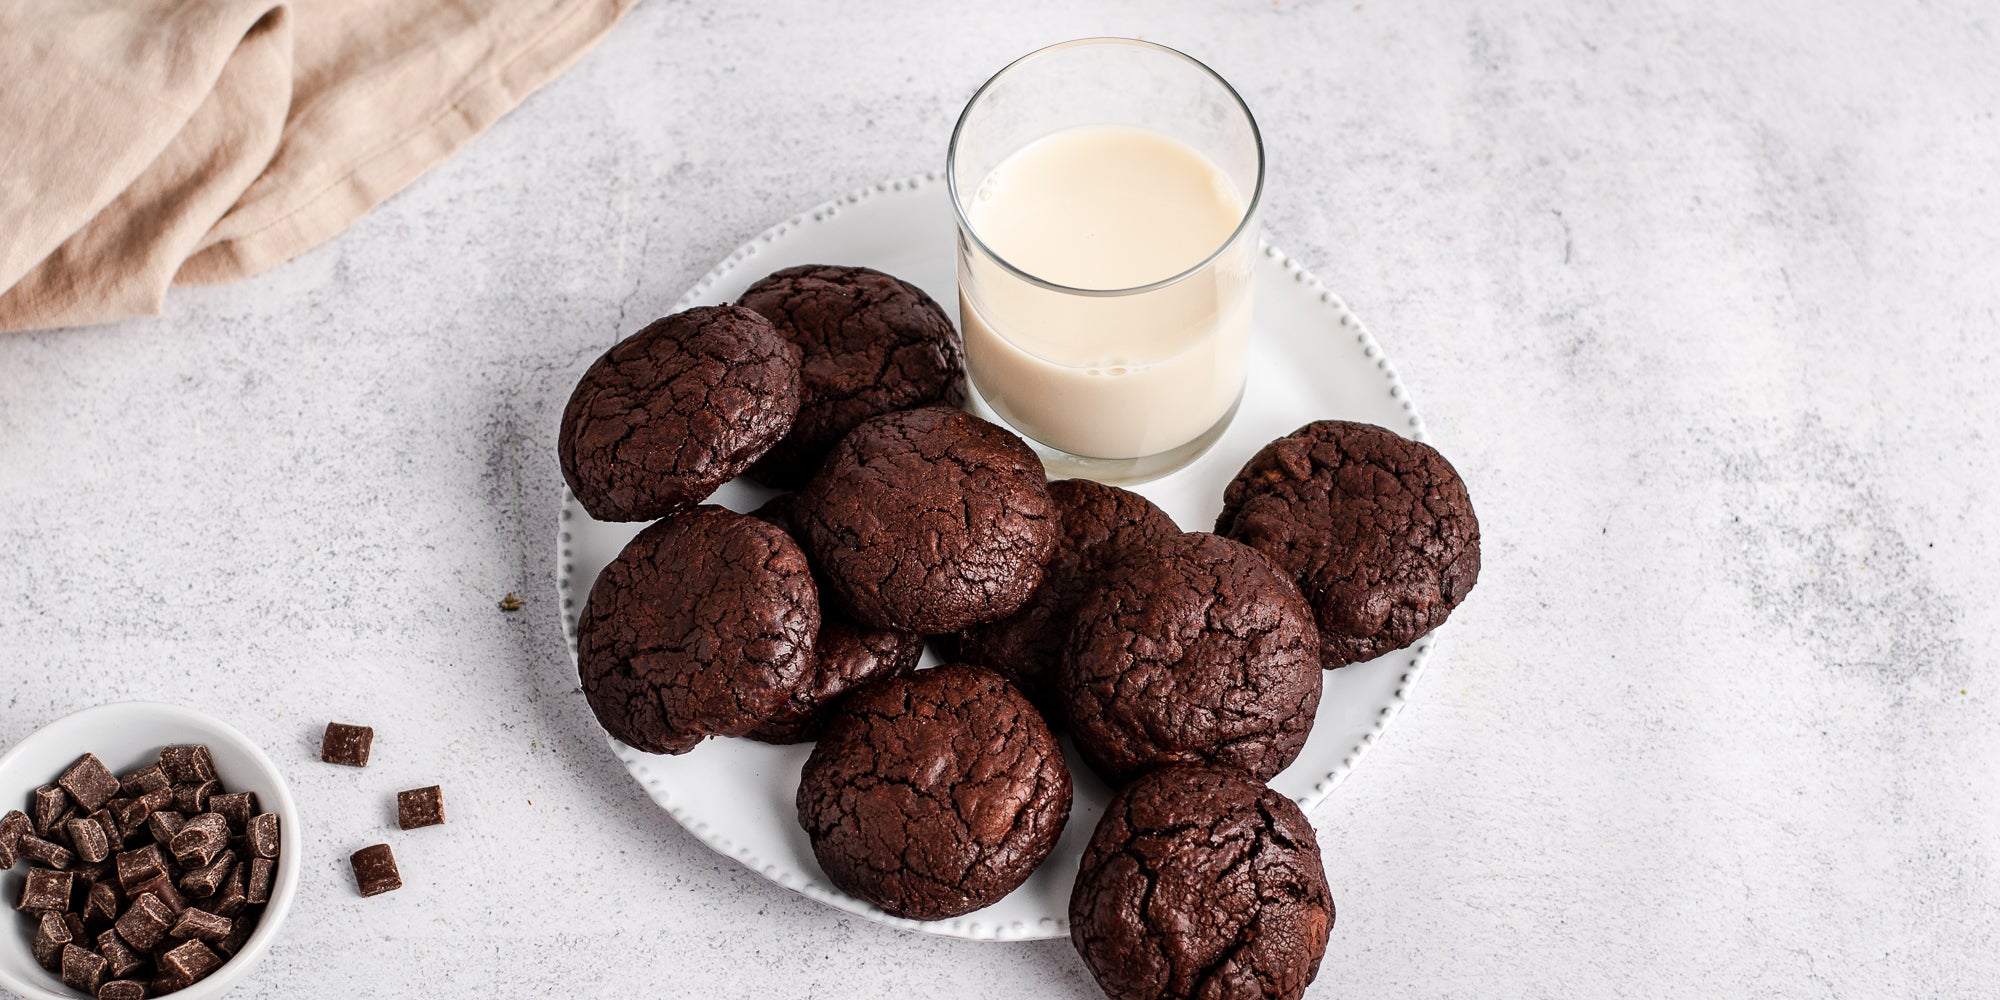 A batch of Chocolate Brownie Cookies on a plate, next to a glass of milk